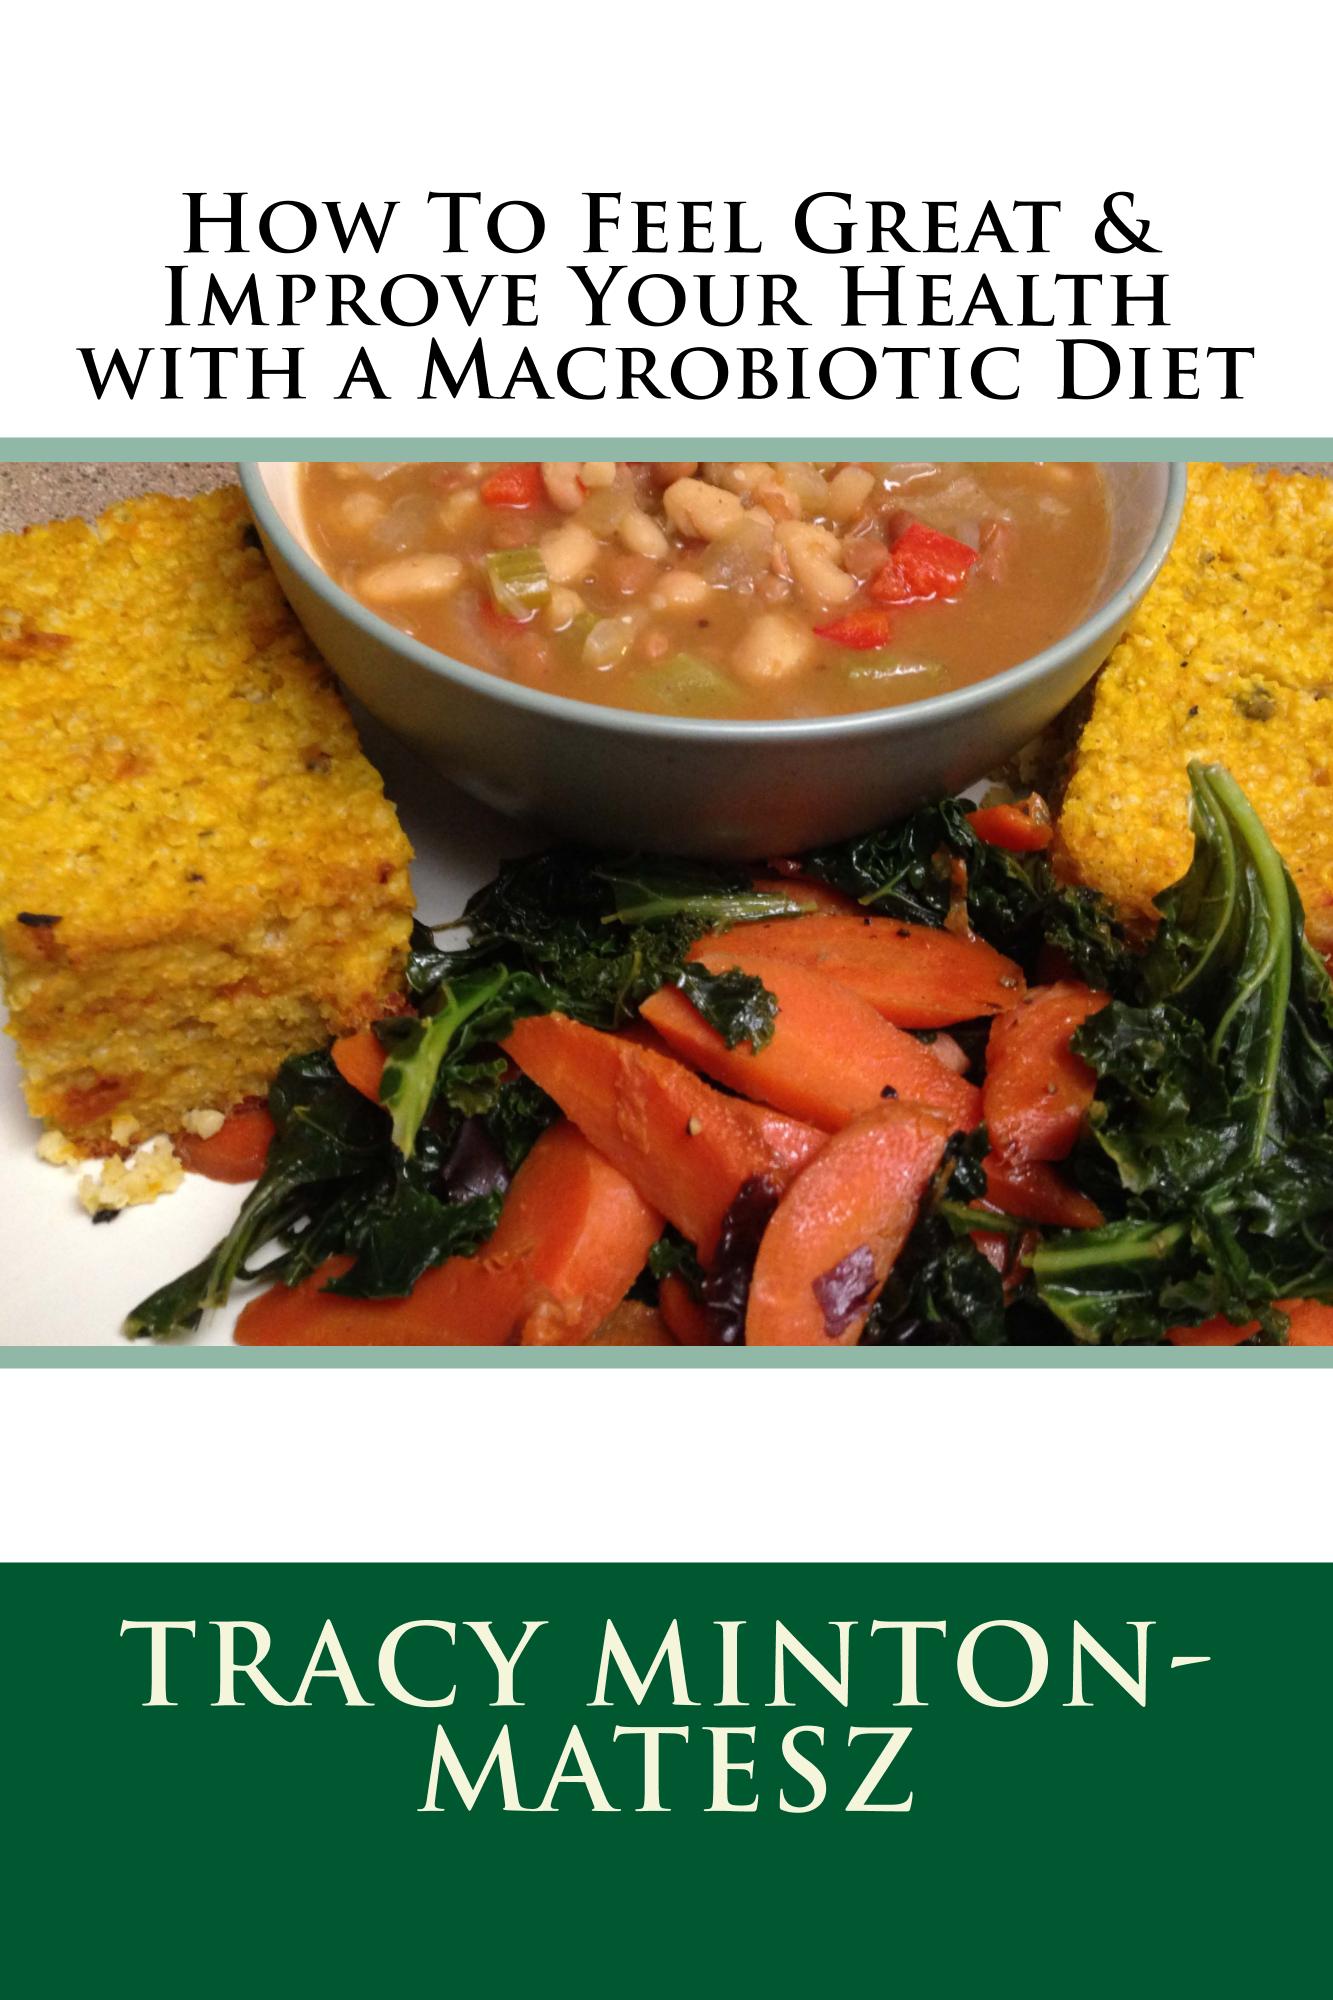 How To Feel Great & Improve Your Health with a Macrobiotic Diet book cover